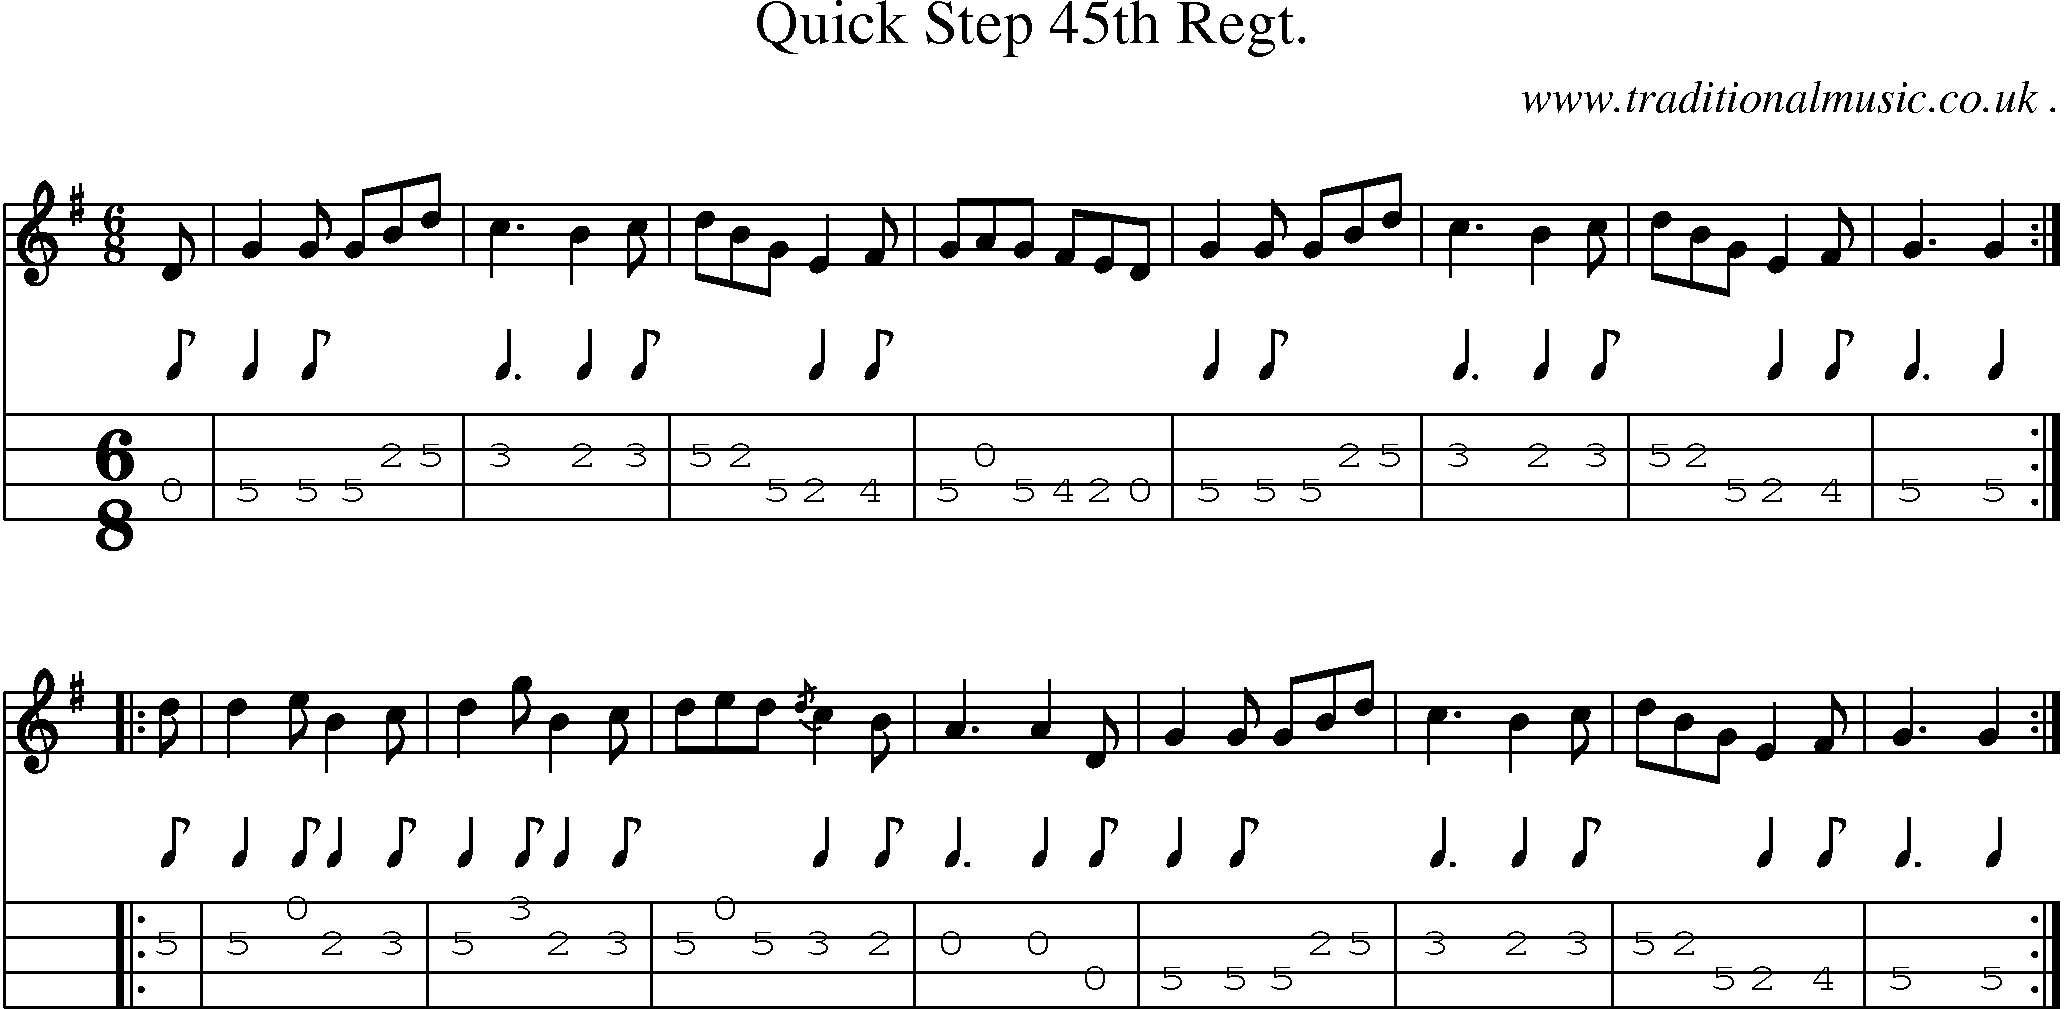 Sheet-music  score, Chords and Mandolin Tabs for Quick Step 45th Regt